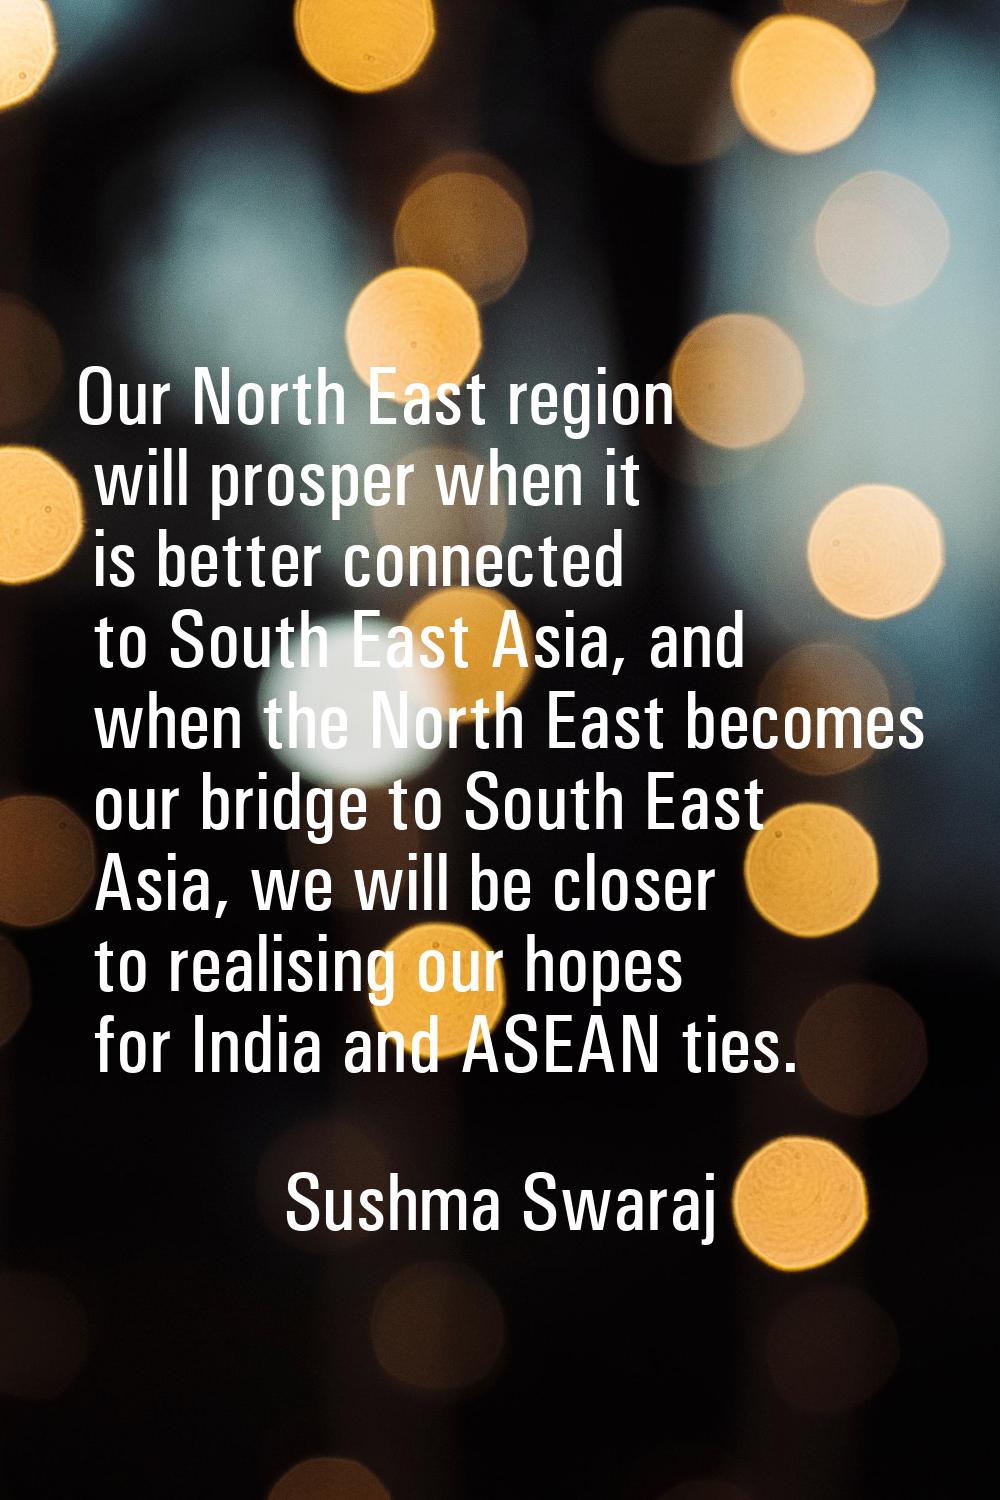 Our North East region will prosper when it is better connected to South East Asia, and when the Nor